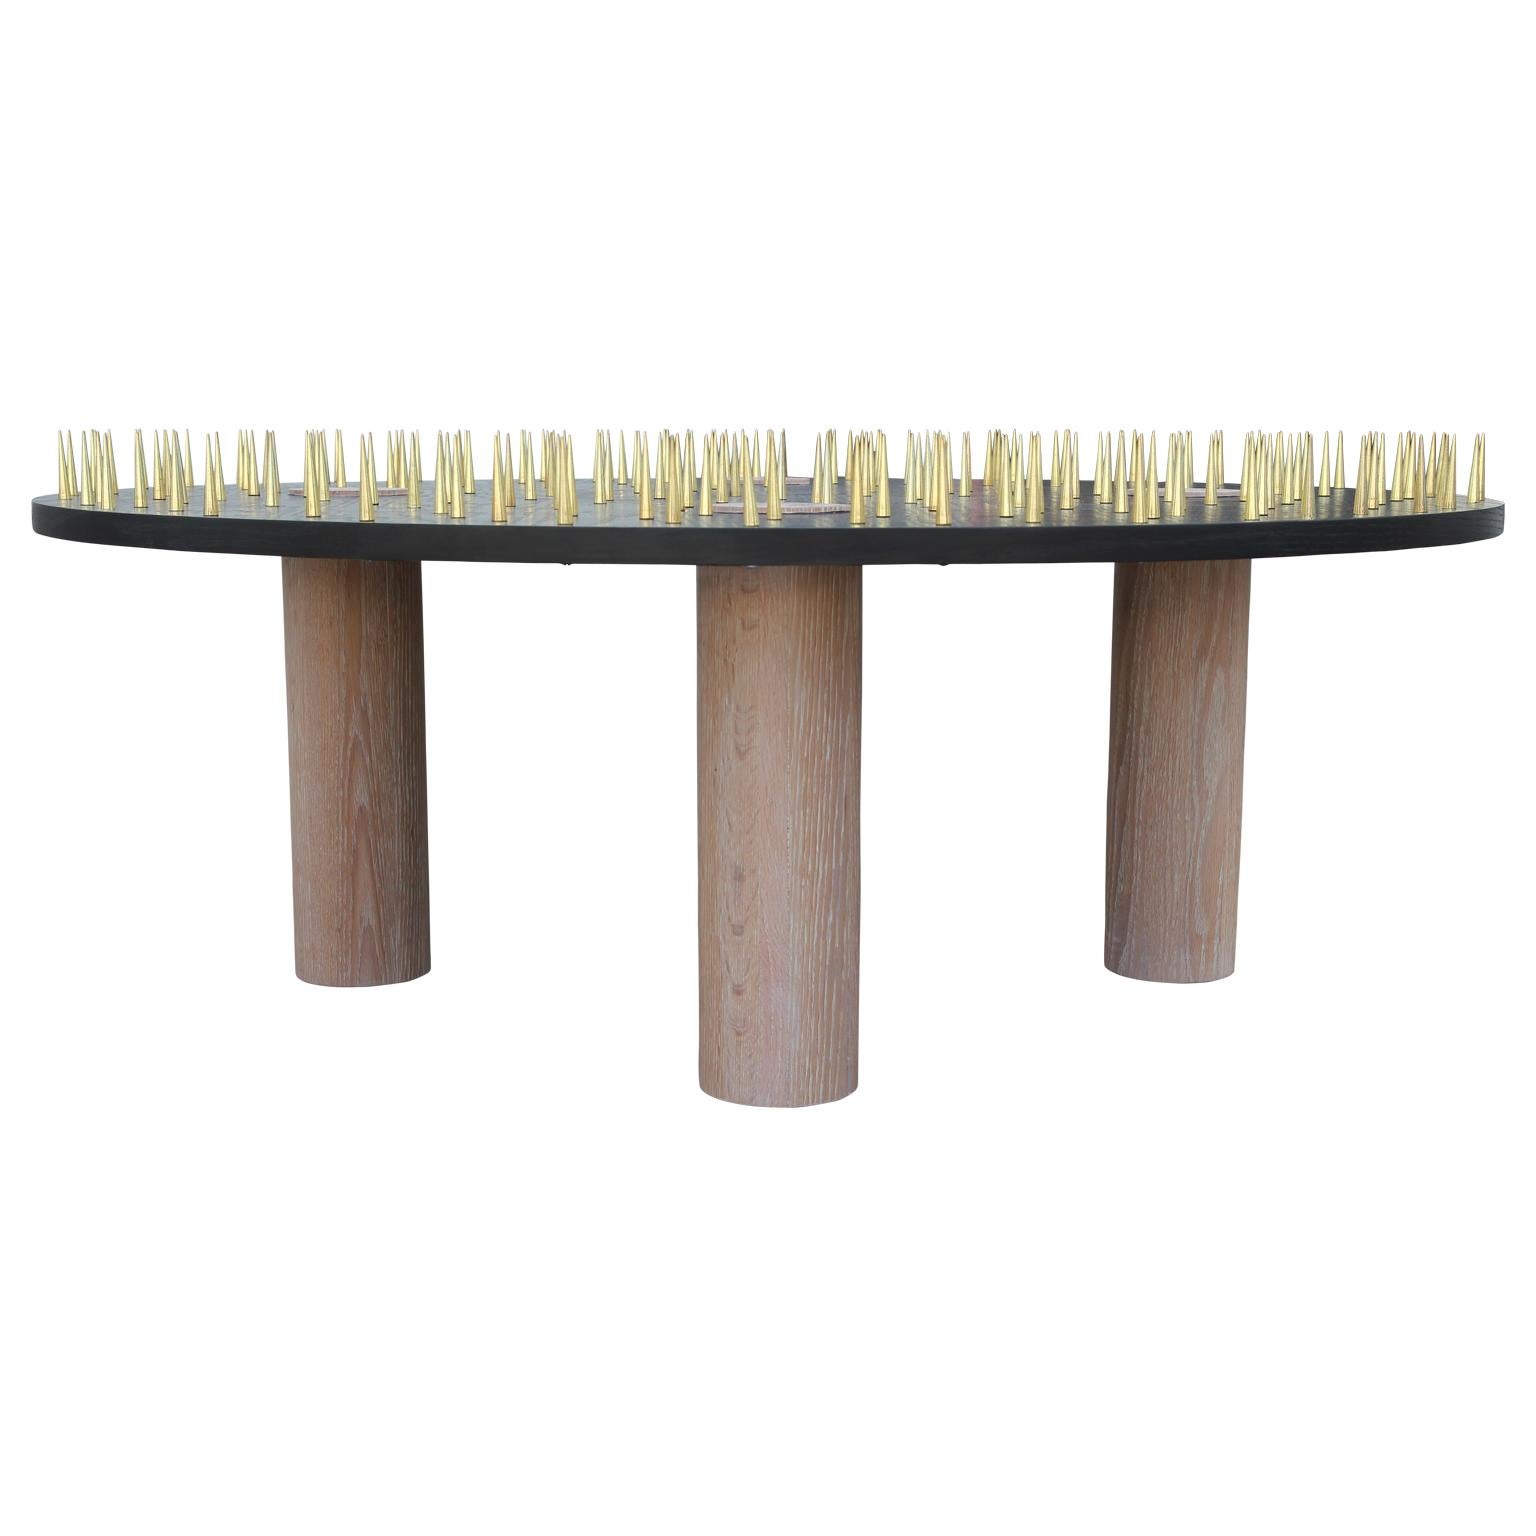 A bold and functional piece of art for your room. This custom round coffee table features over 200 solid brass spikes spread across the top. Solid white washed oak legs protrude through the black stained top which can be used as coasters if desired.